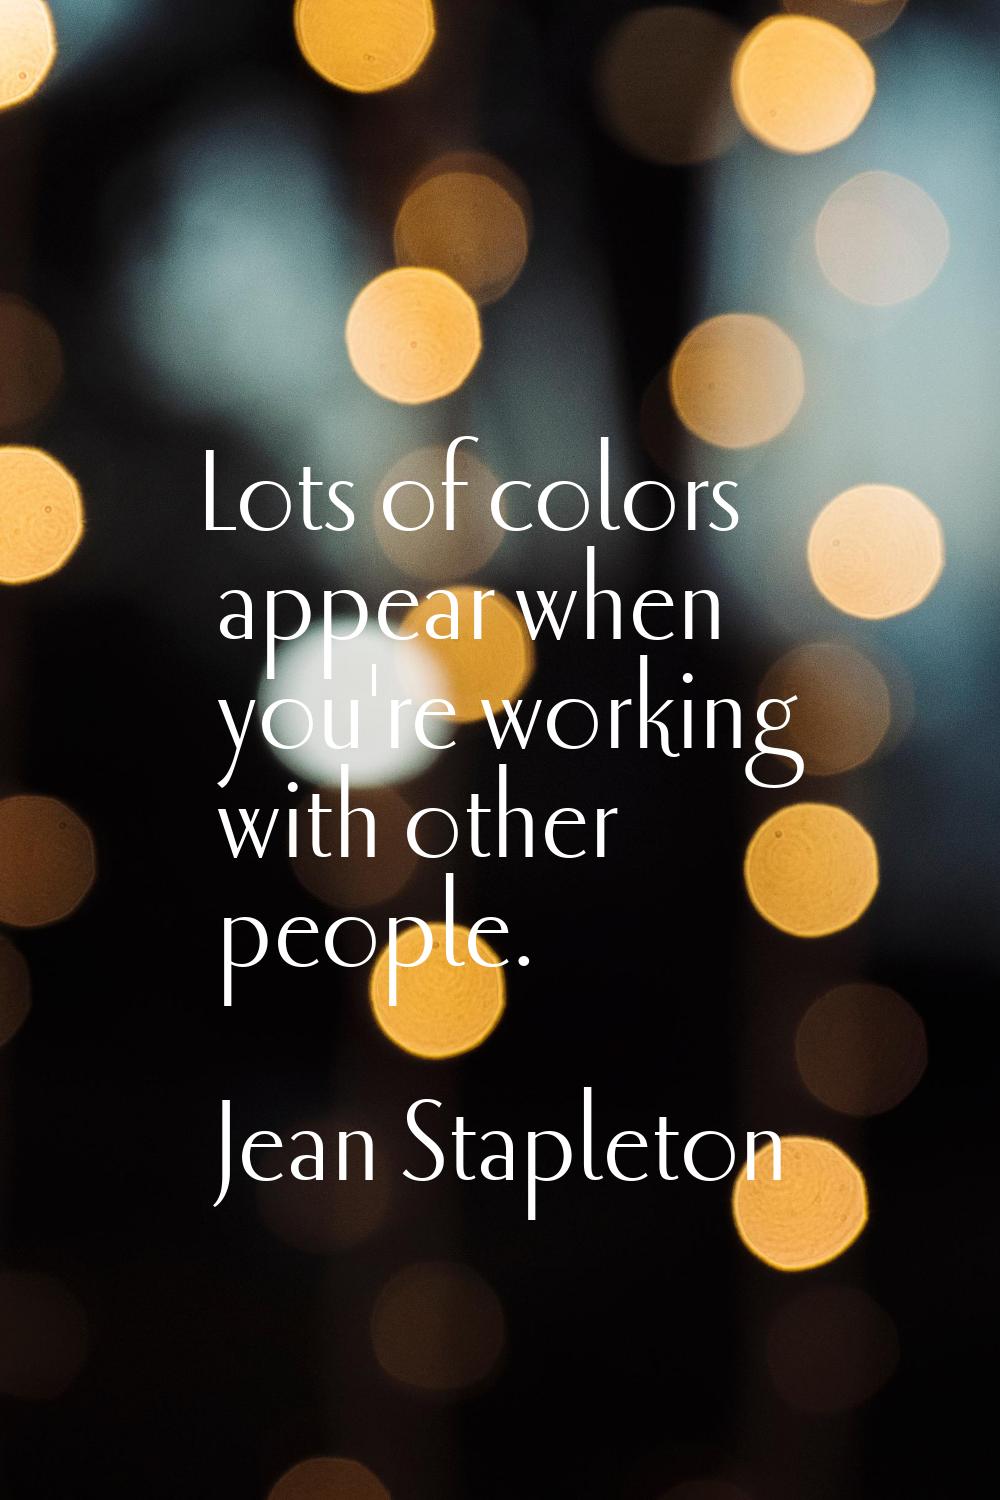 Lots of colors appear when you're working with other people.